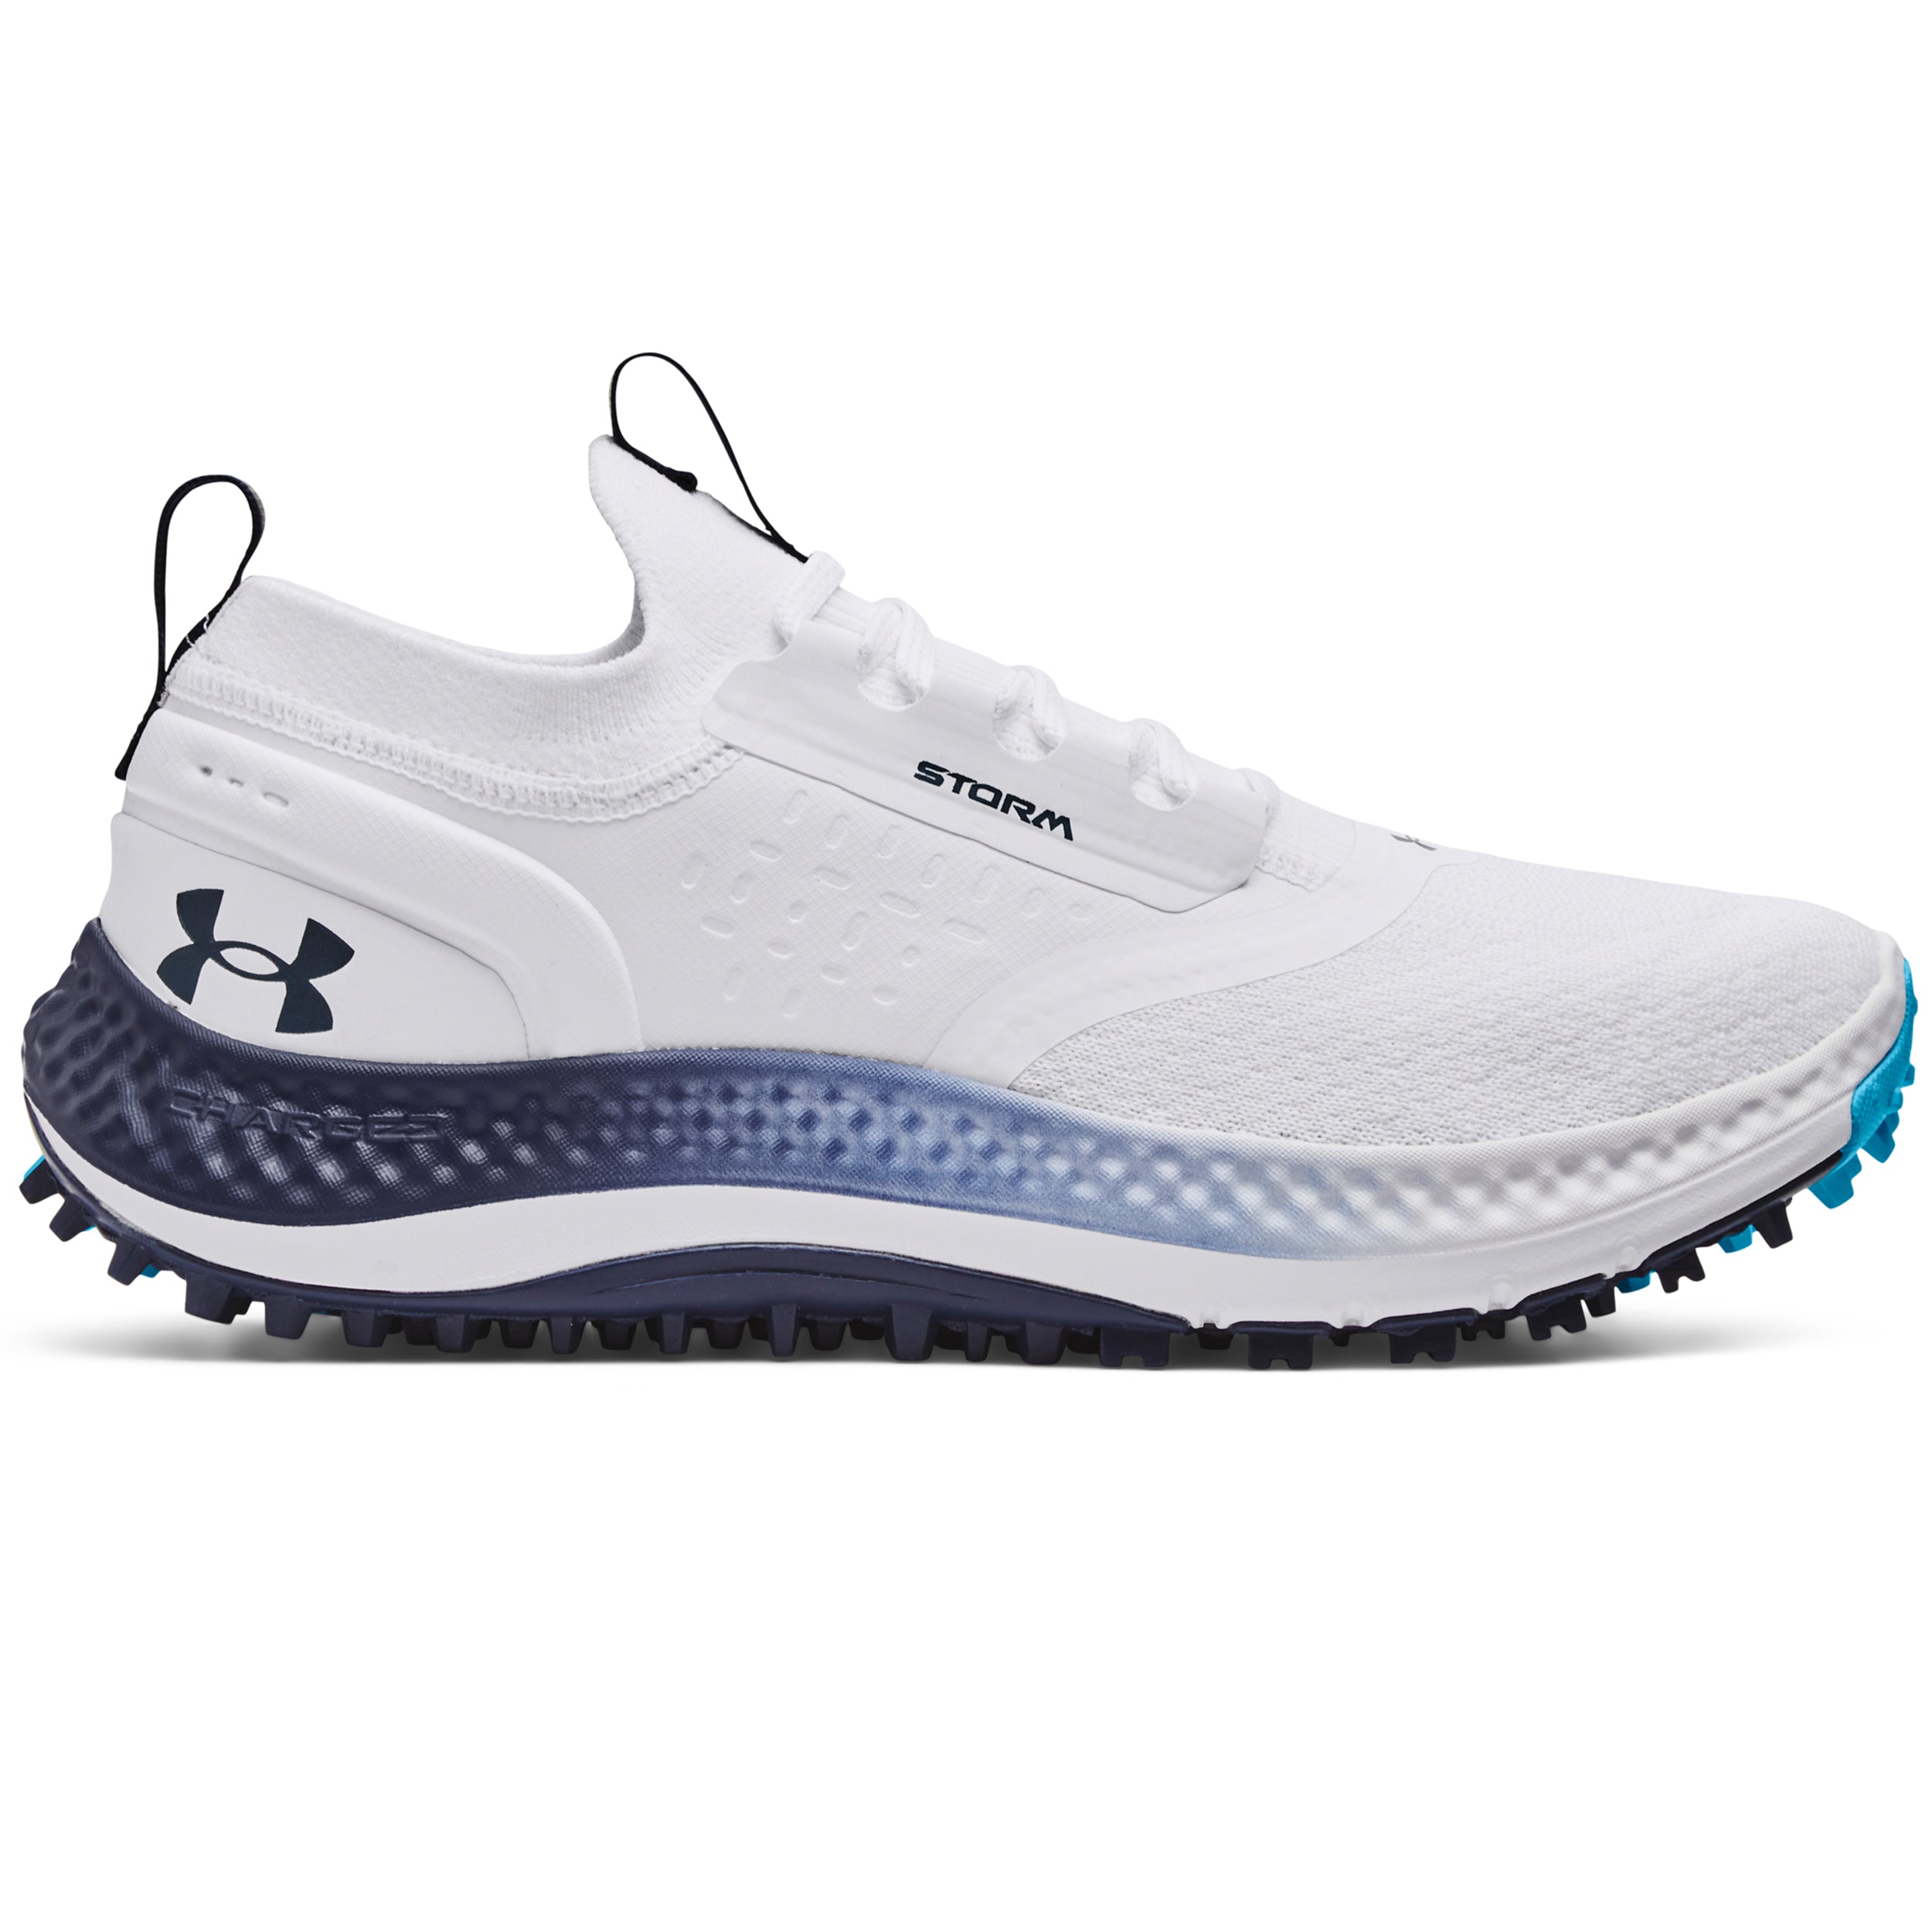 Under Armour Charged Phantom SL Golf Shoes 3026400 White Midnight Navy ...